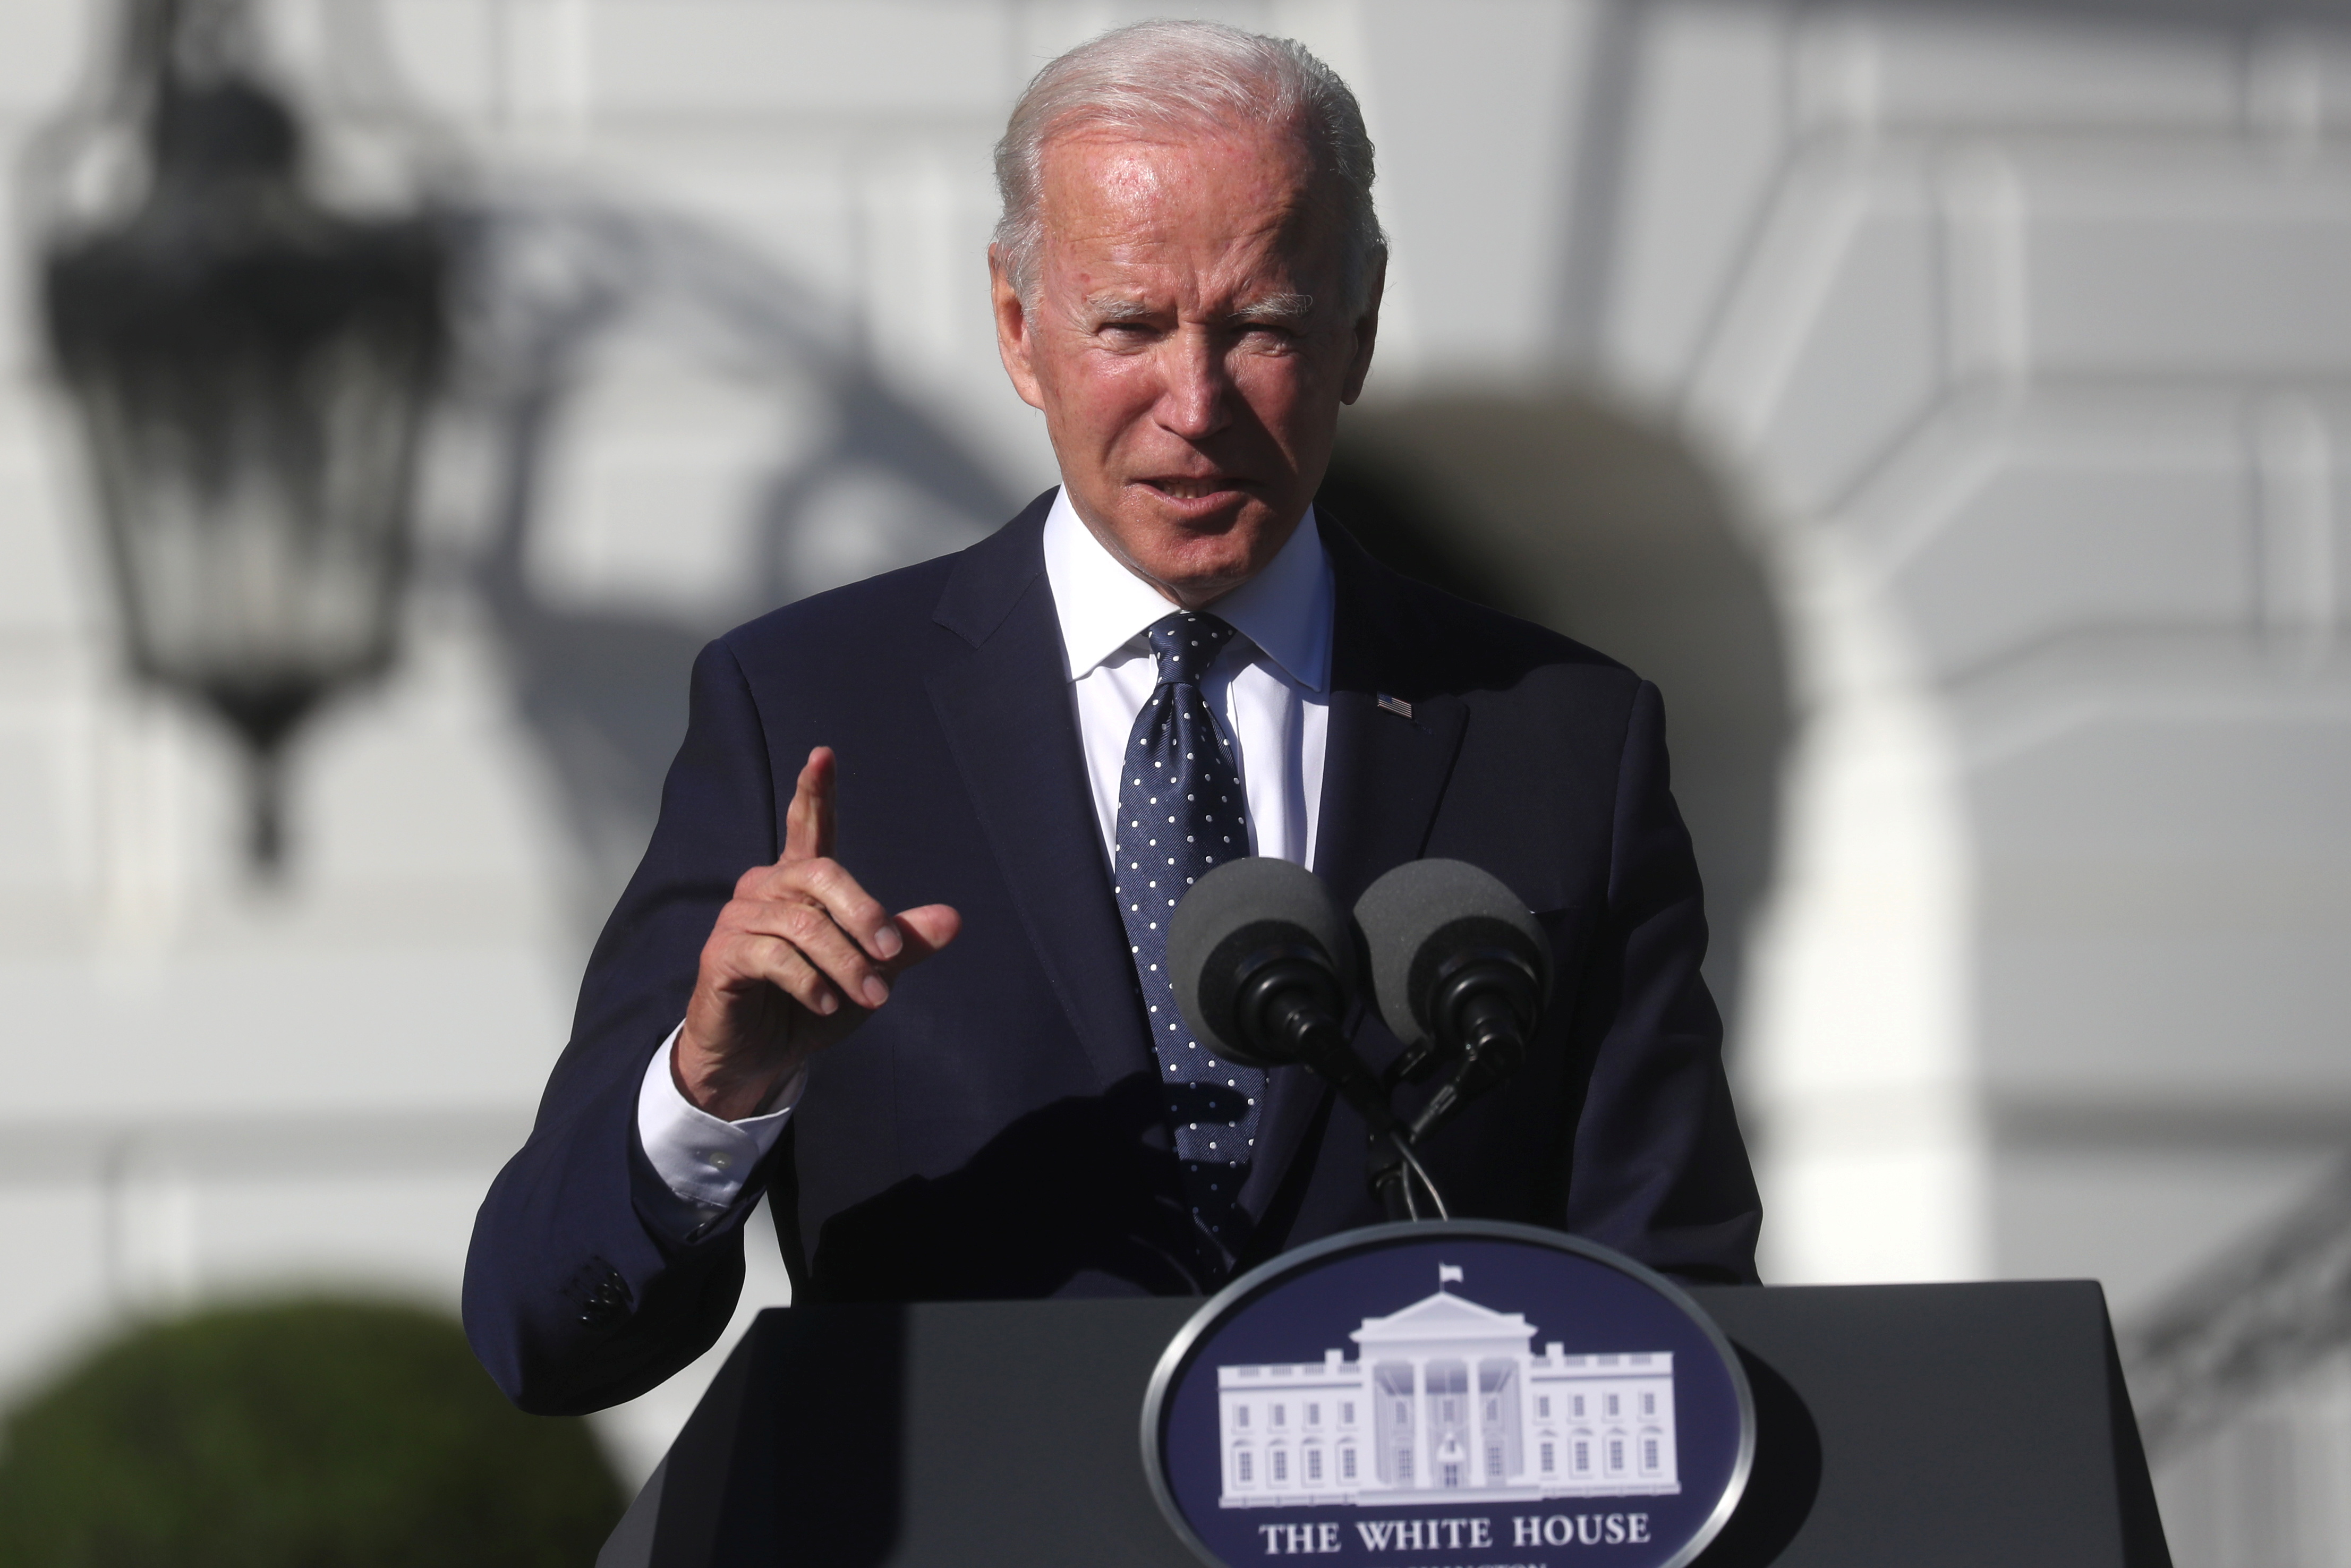 U.S. President Joe Biden honors the Council of Chief State School Officers' 2020 and 2021 State and National Teachers of the Year